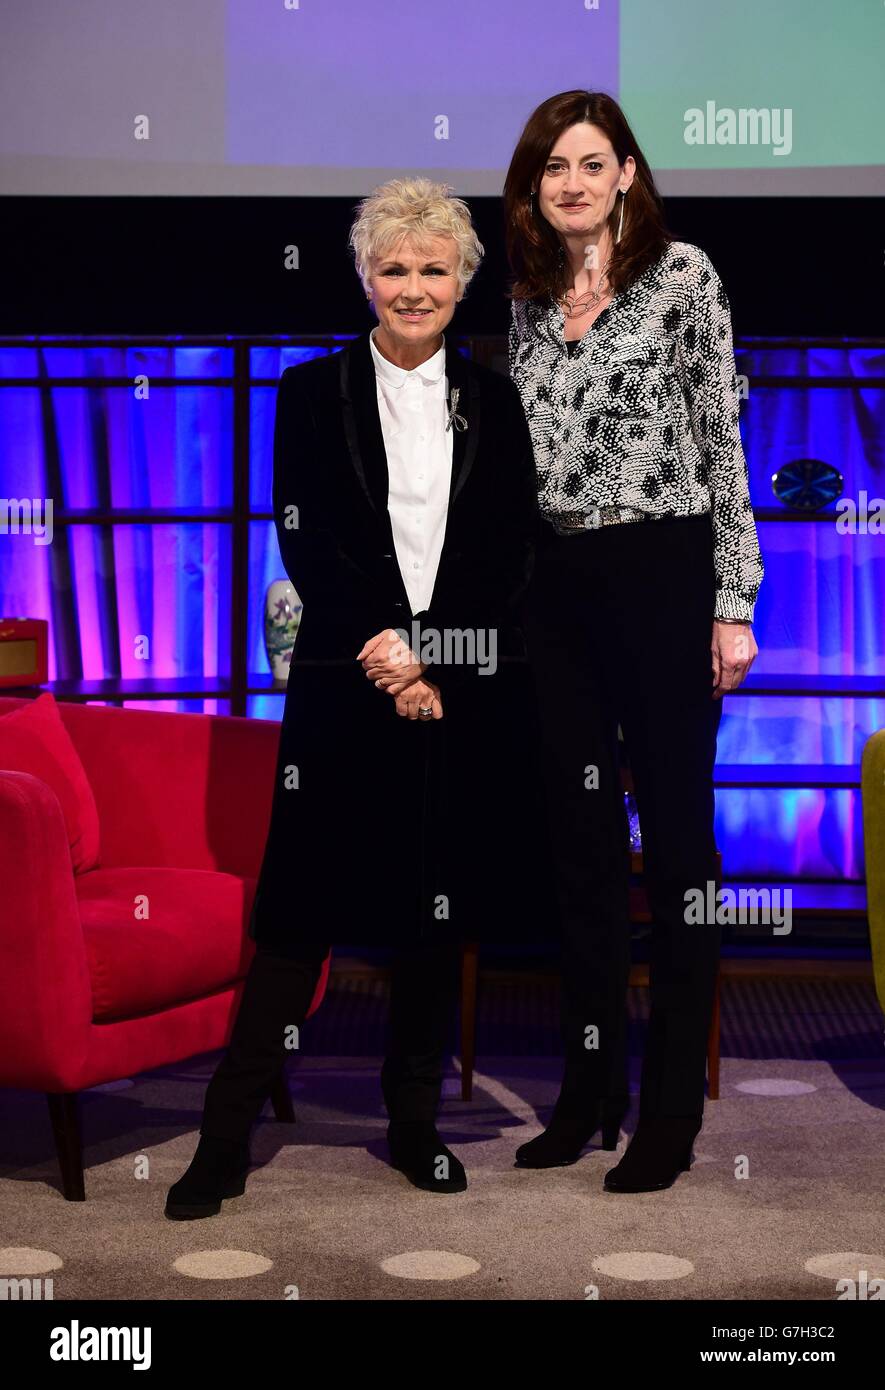 Julie Walters (left), BAFTA fellow, and Amanda Berry, ahead of Walter's onstage Q&A to launch a new BAFTA strand 'A Life in TV' at BAFTA in London England. Stock Photo